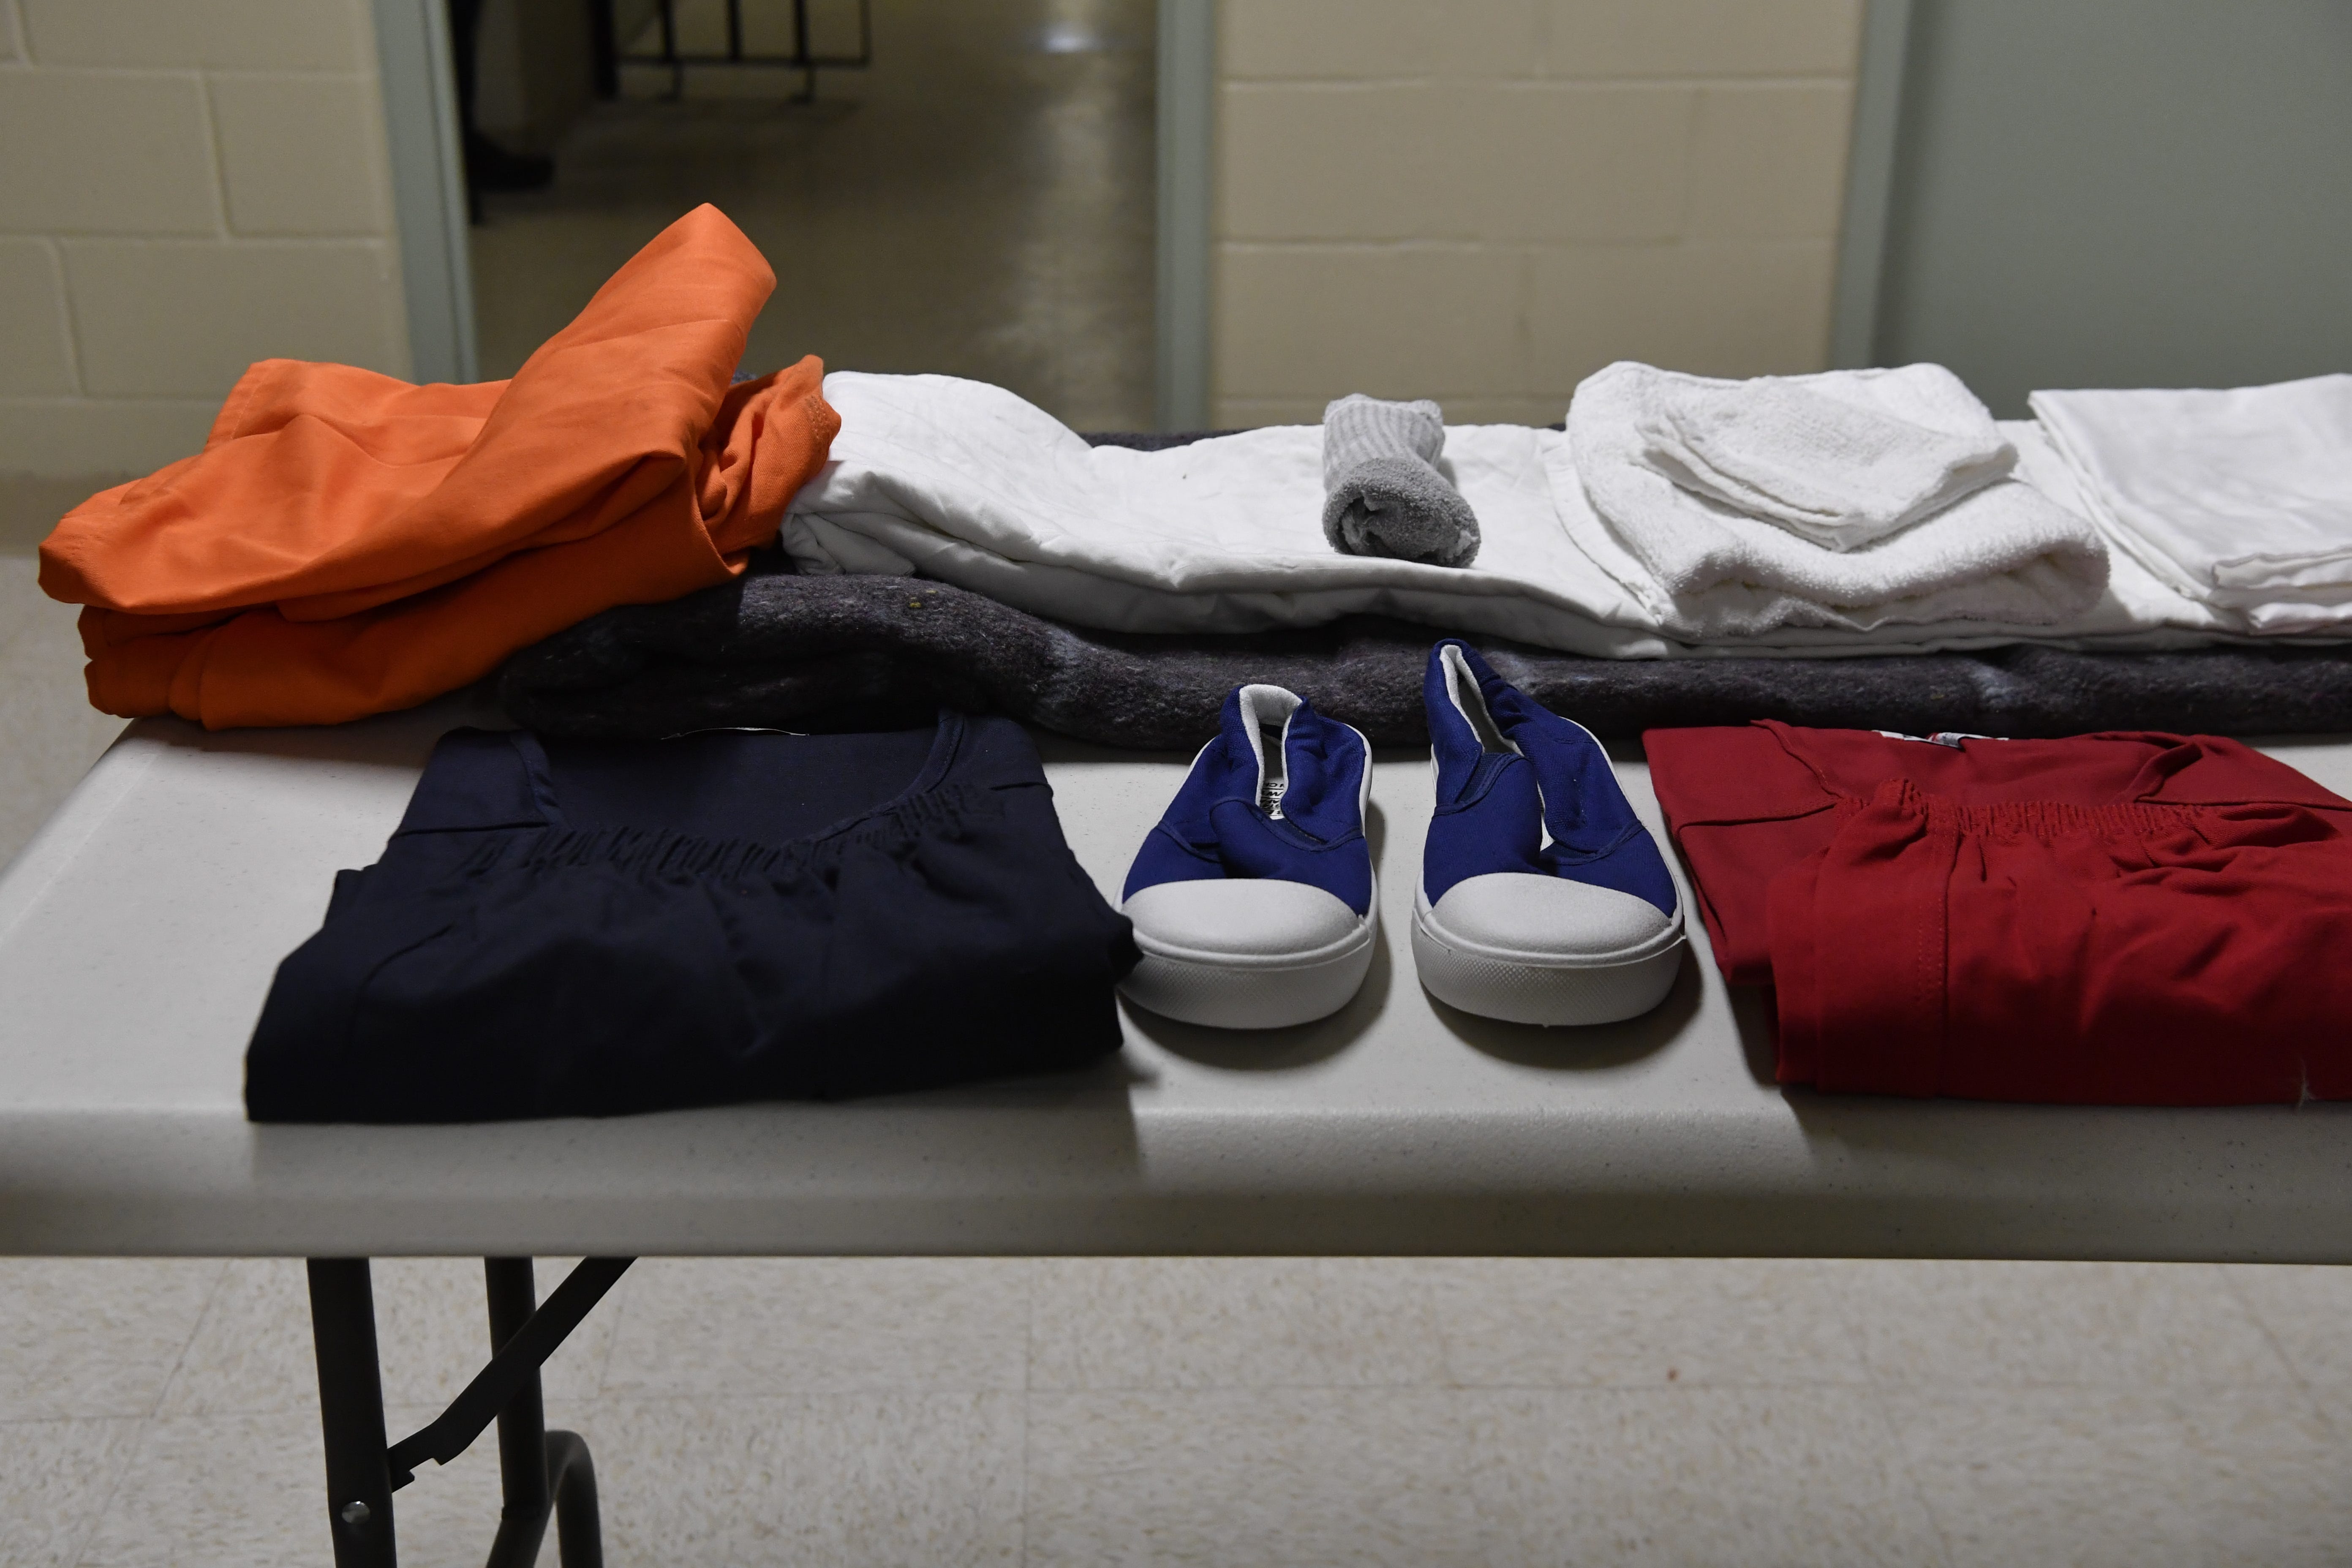 Detainees are given this set of clothing when they arrive at the Bluebonnet Detention Center in Anson, Texas.